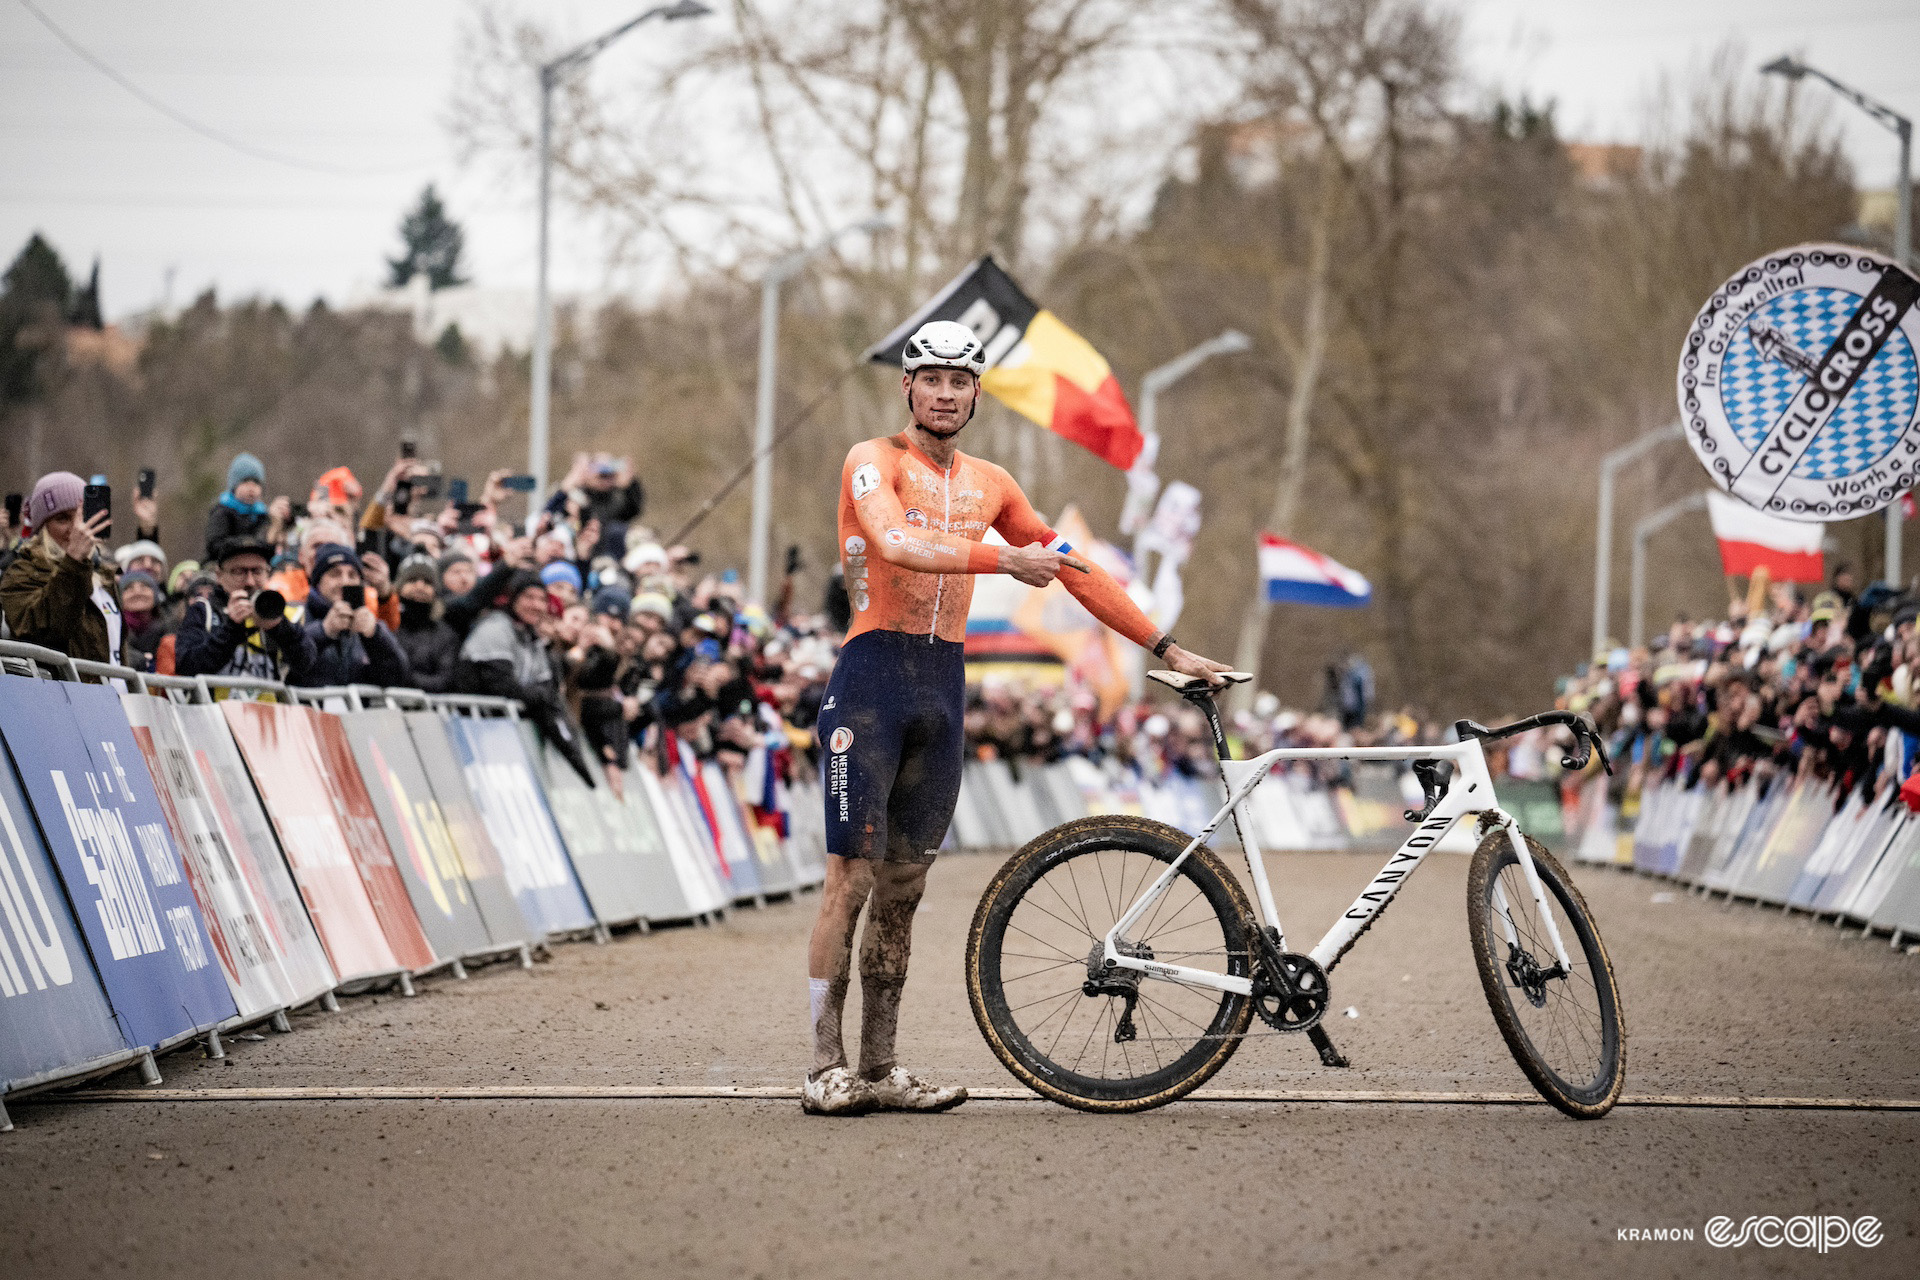 Mathieu van der Poel points at his bike at the finish line after winning the 2024 Cyclocross World Championships in Tábor.